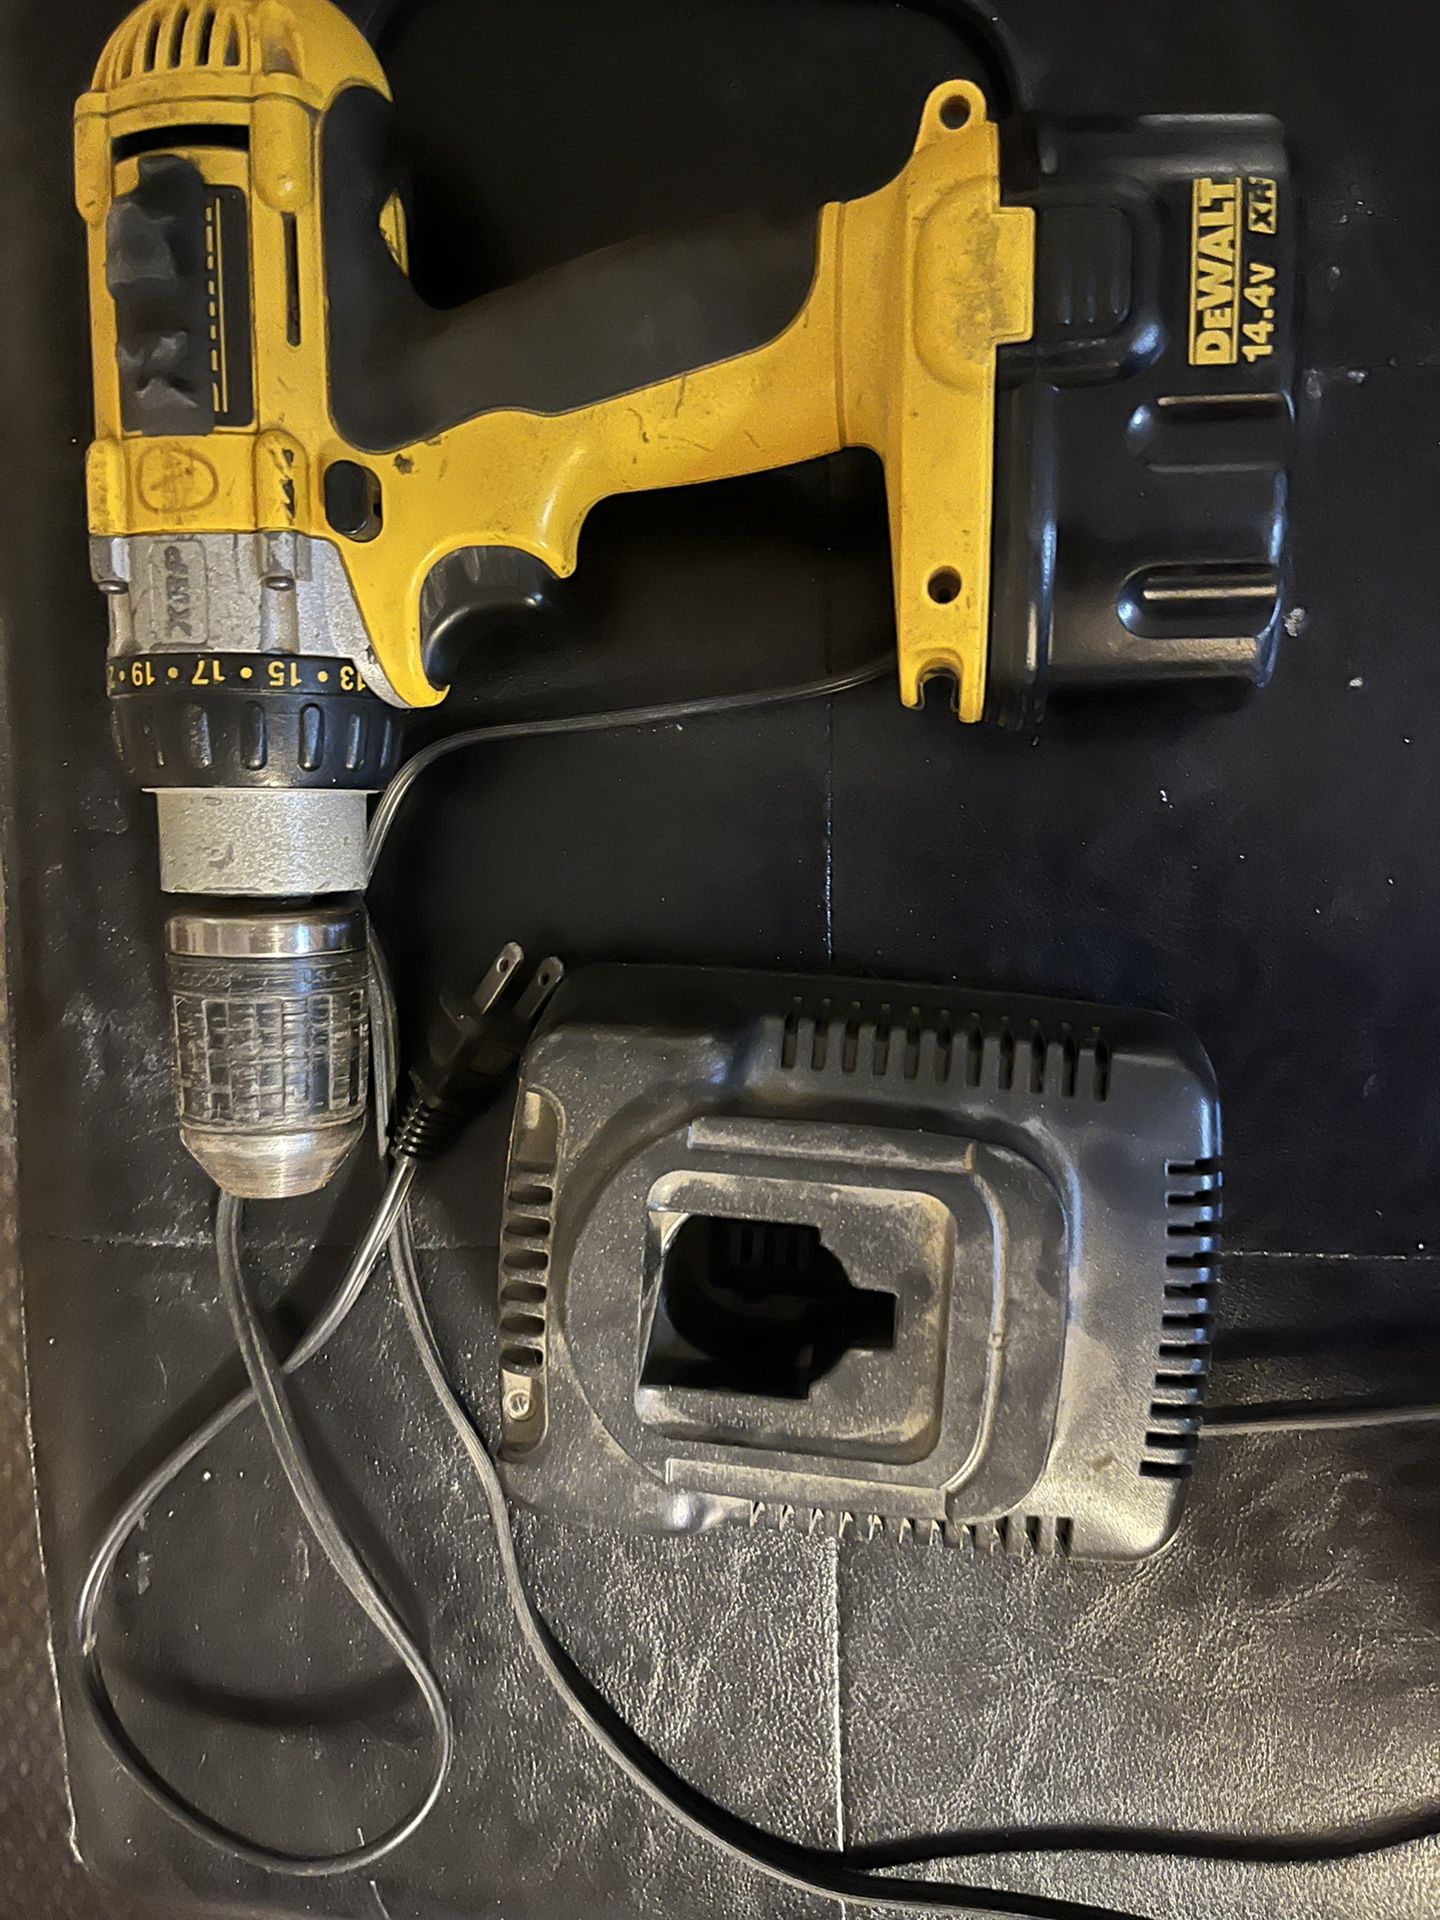 Dewalt Drill And Charger